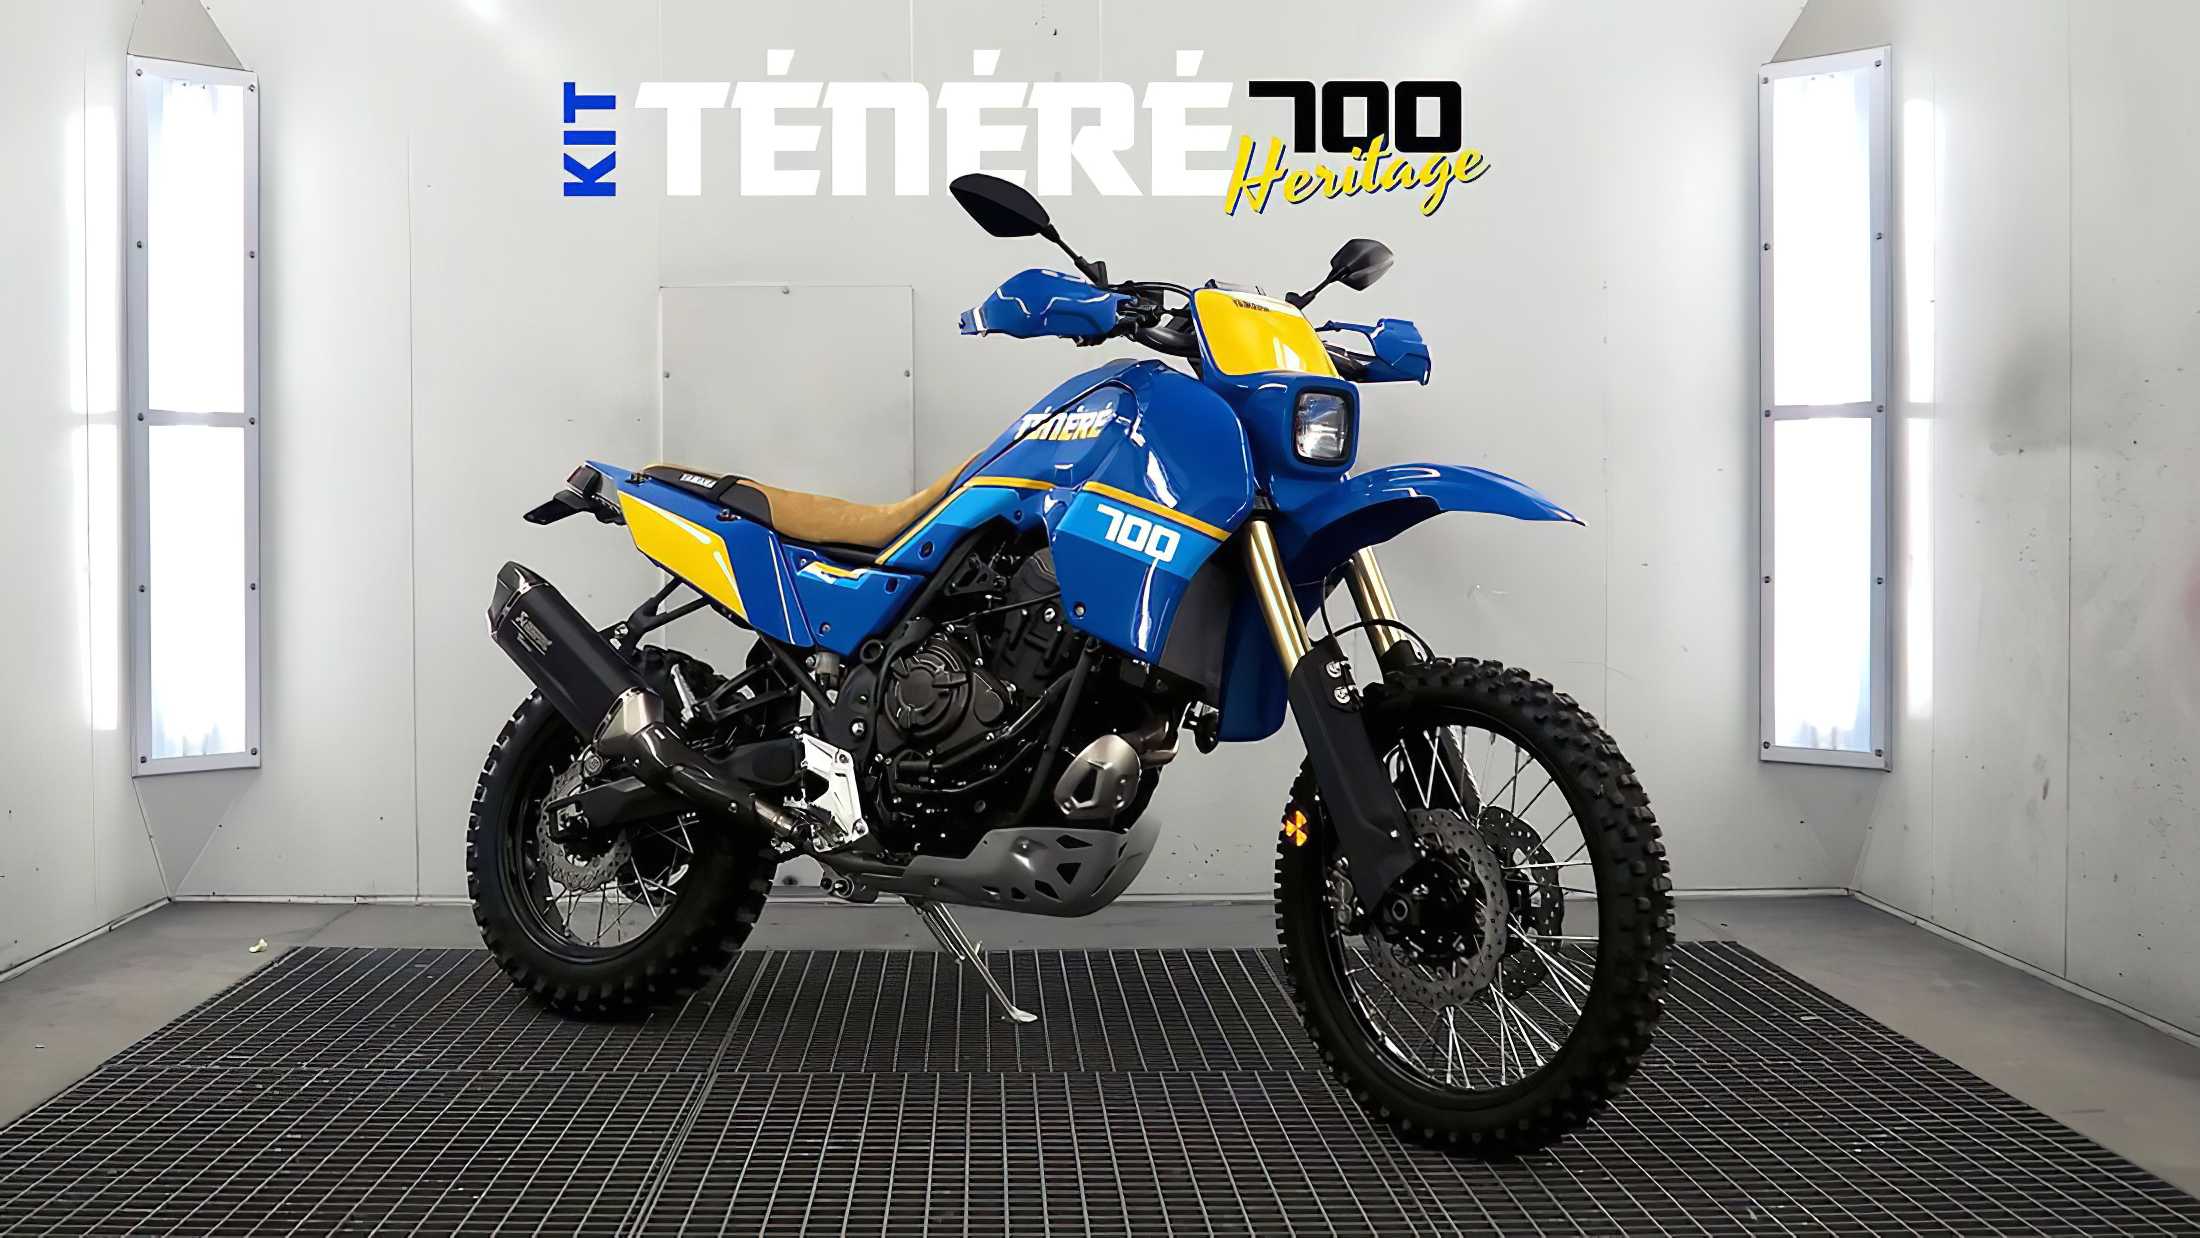 Heritage Kit for the Tenere 700
- also in the MOTORCYCLES.NEWS APP